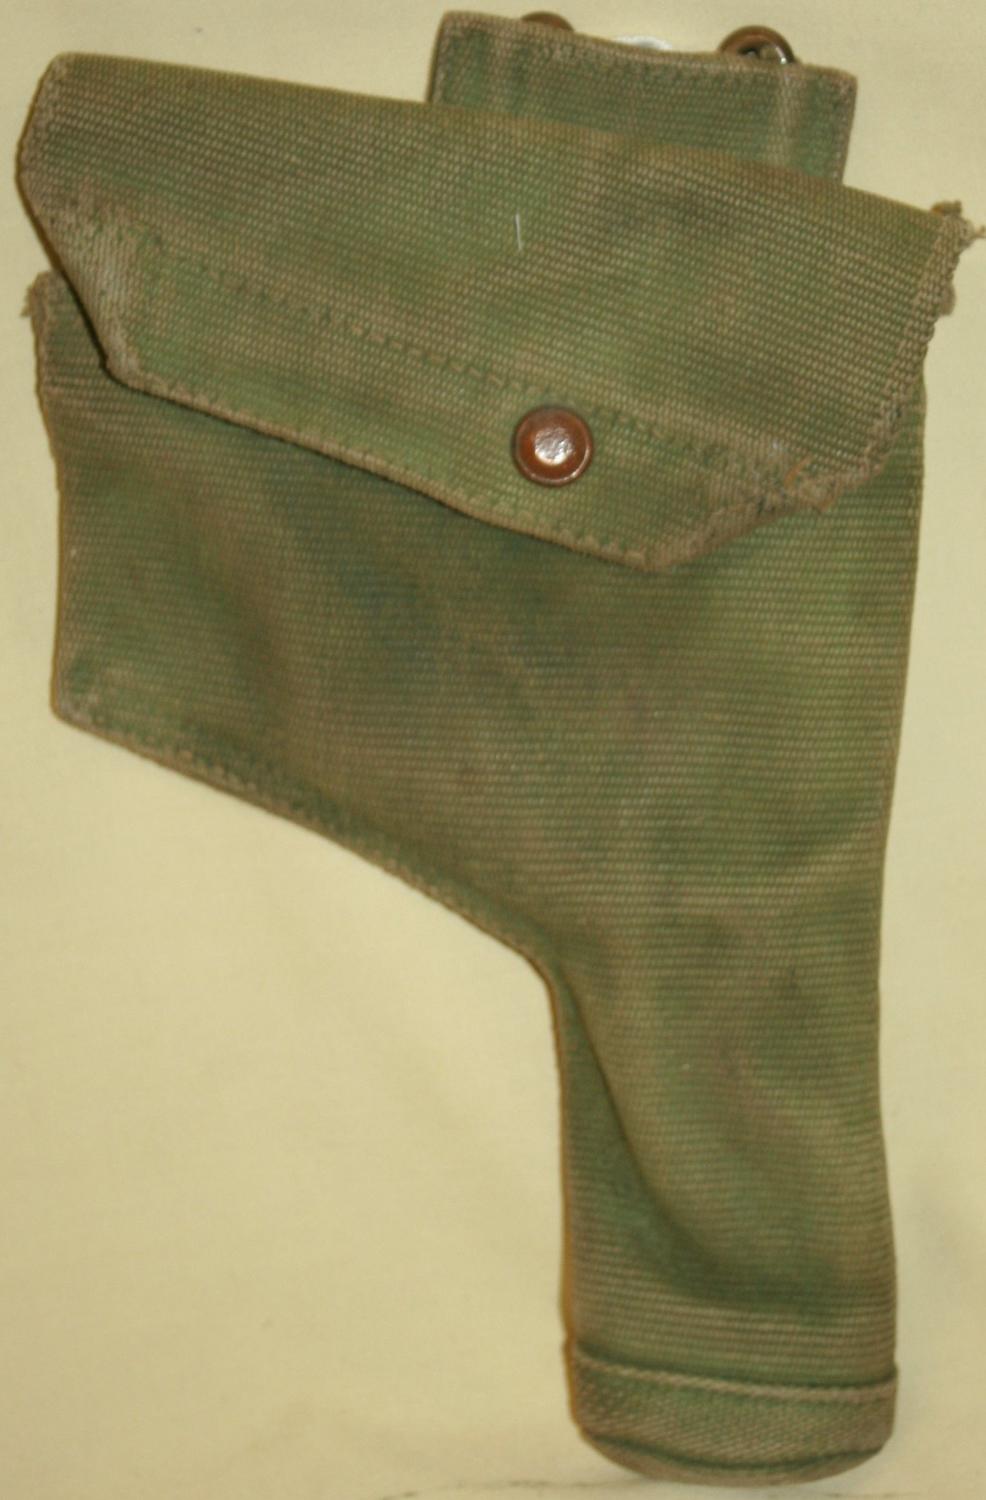 A 08 WEBBING 1939 DATED HOLSTER